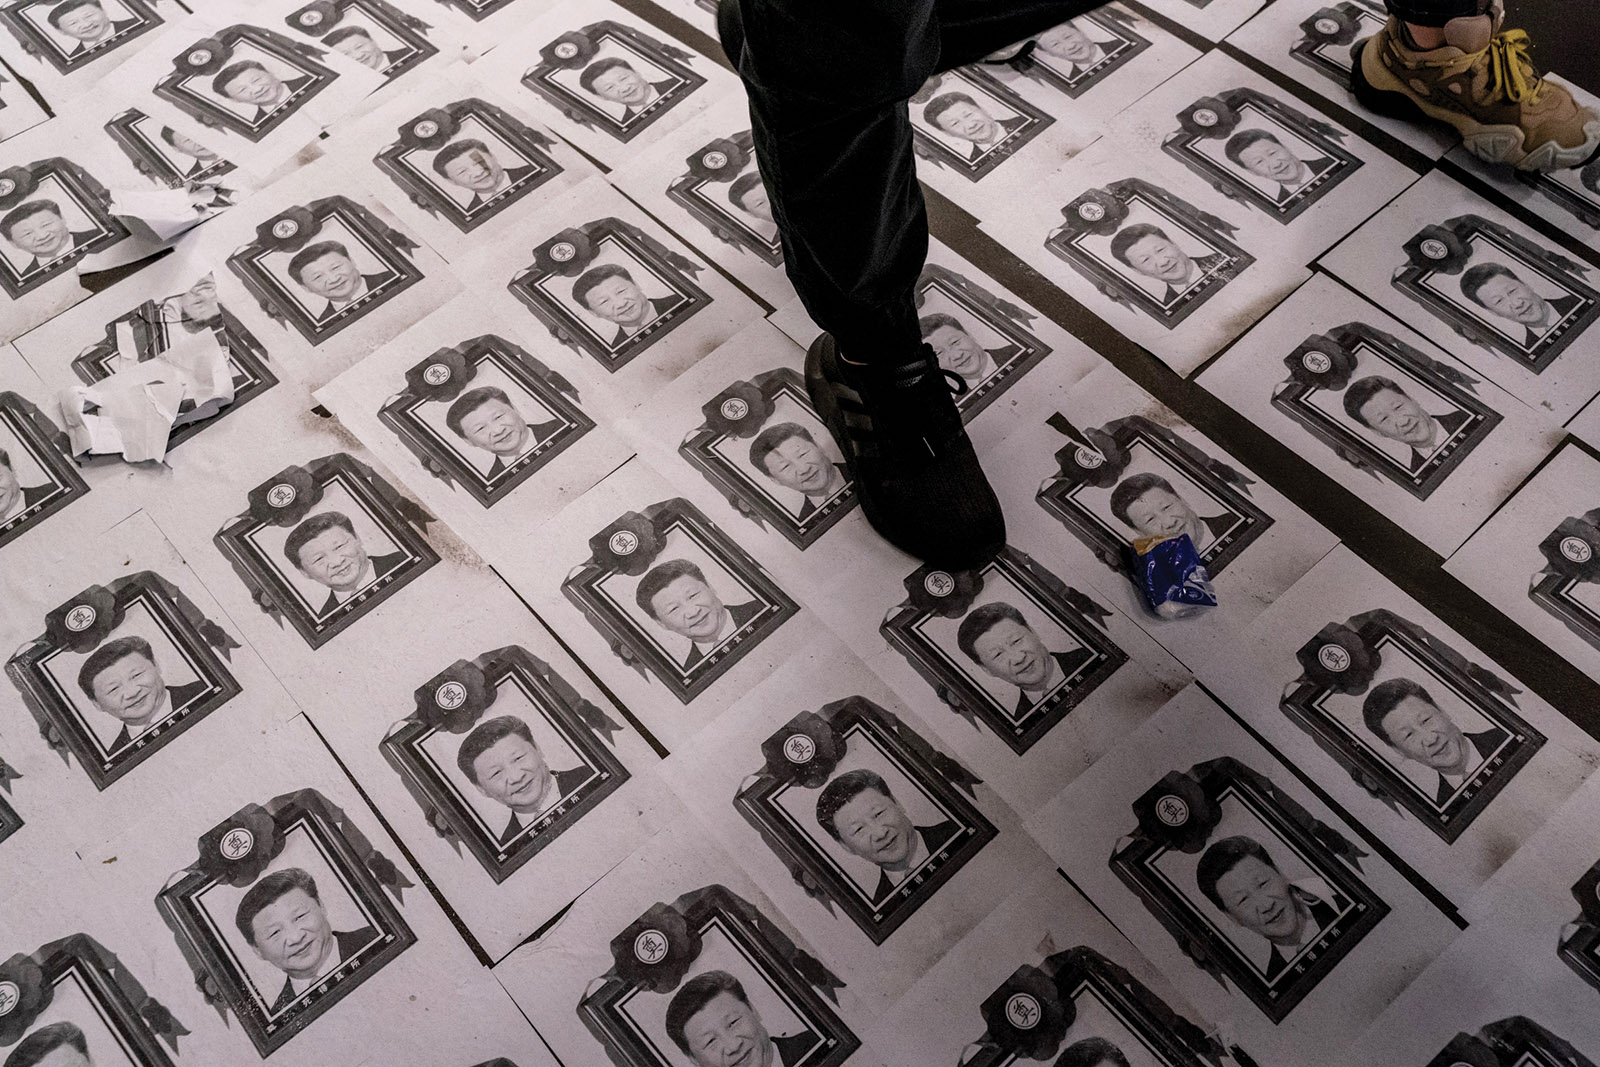 Protesters walking over images of Chinese leader Xi Jinping during pro-democracy demonstrations, Hong Kong